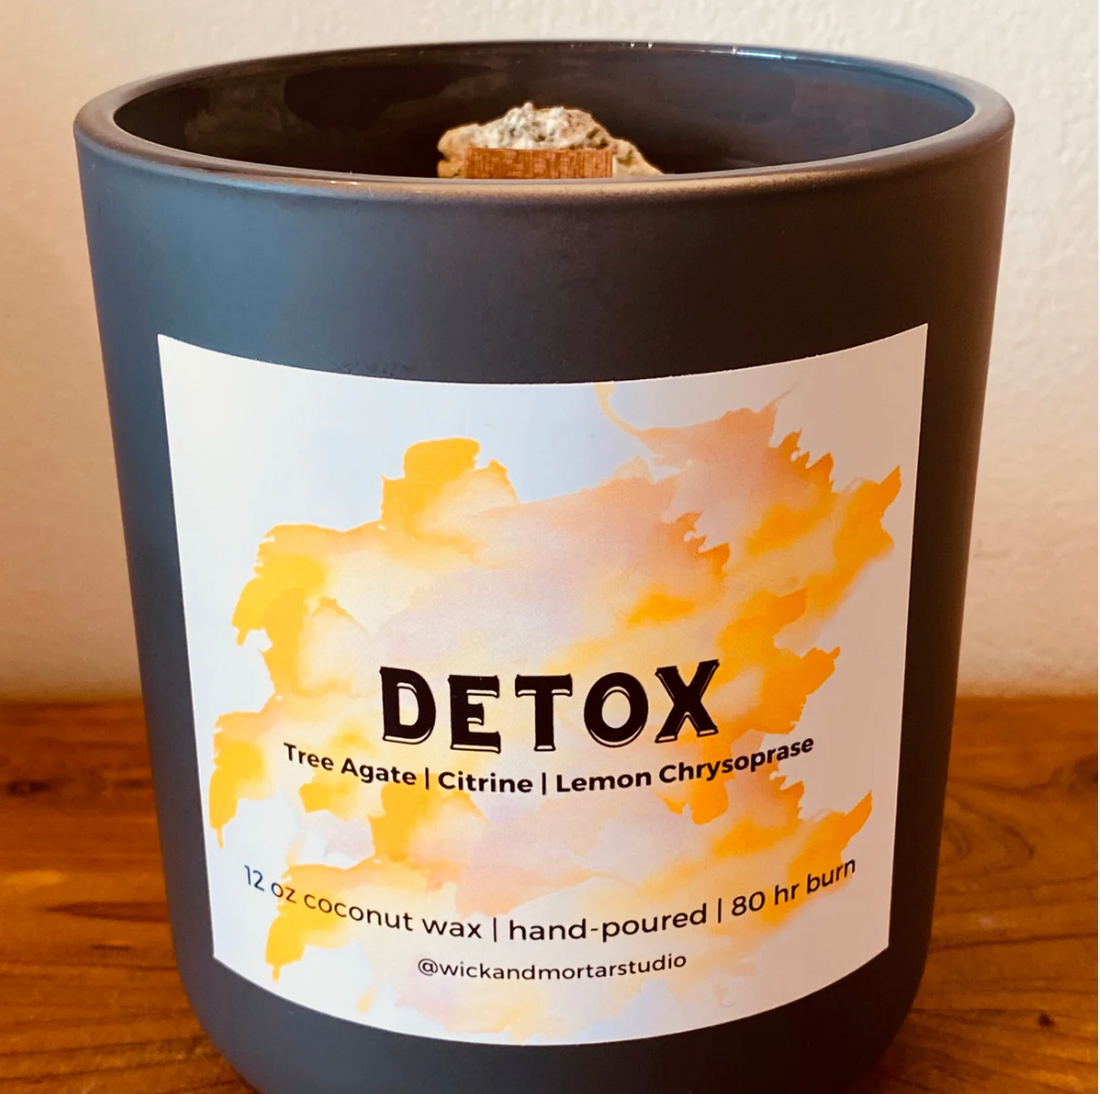 You need Detox..here you go! Detox Crystal Candles